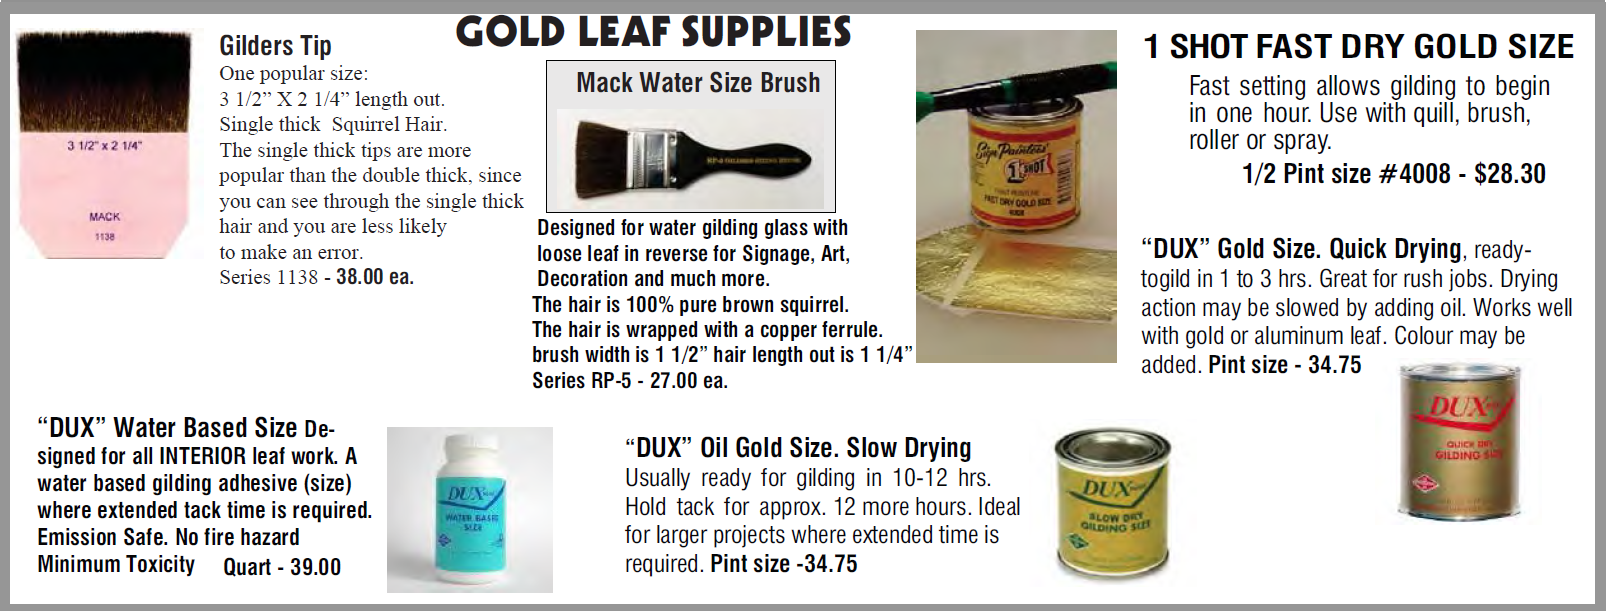 gold leaf supplies descrip and prices - Gold Leaf Supplies